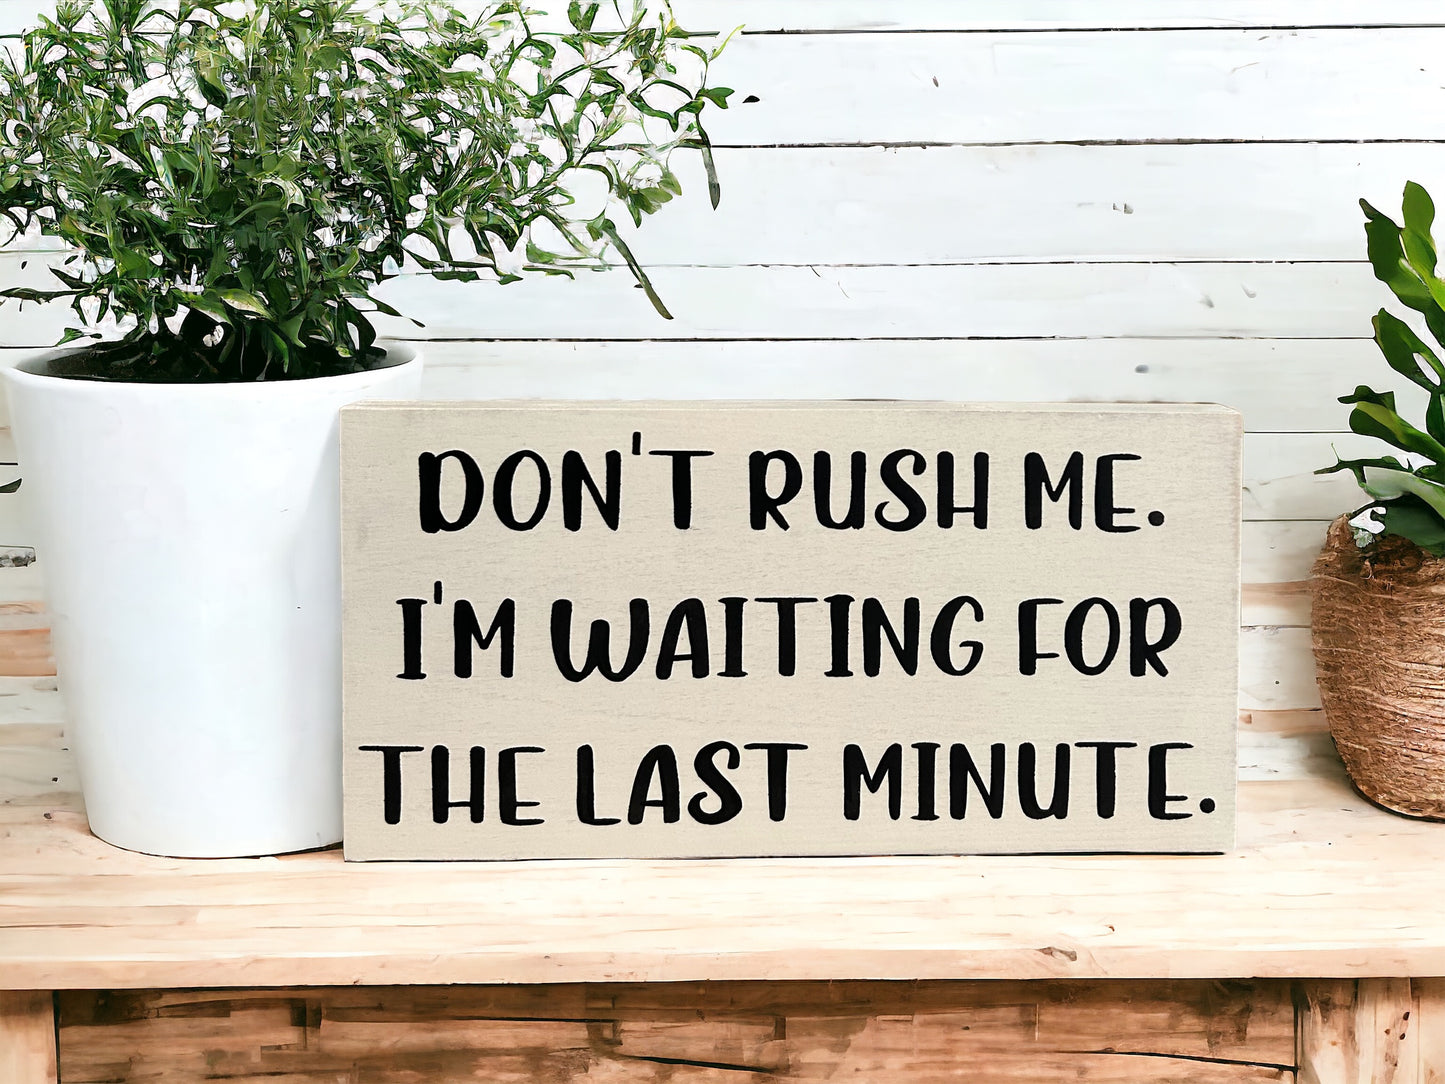 "Don't rush me" wood sign